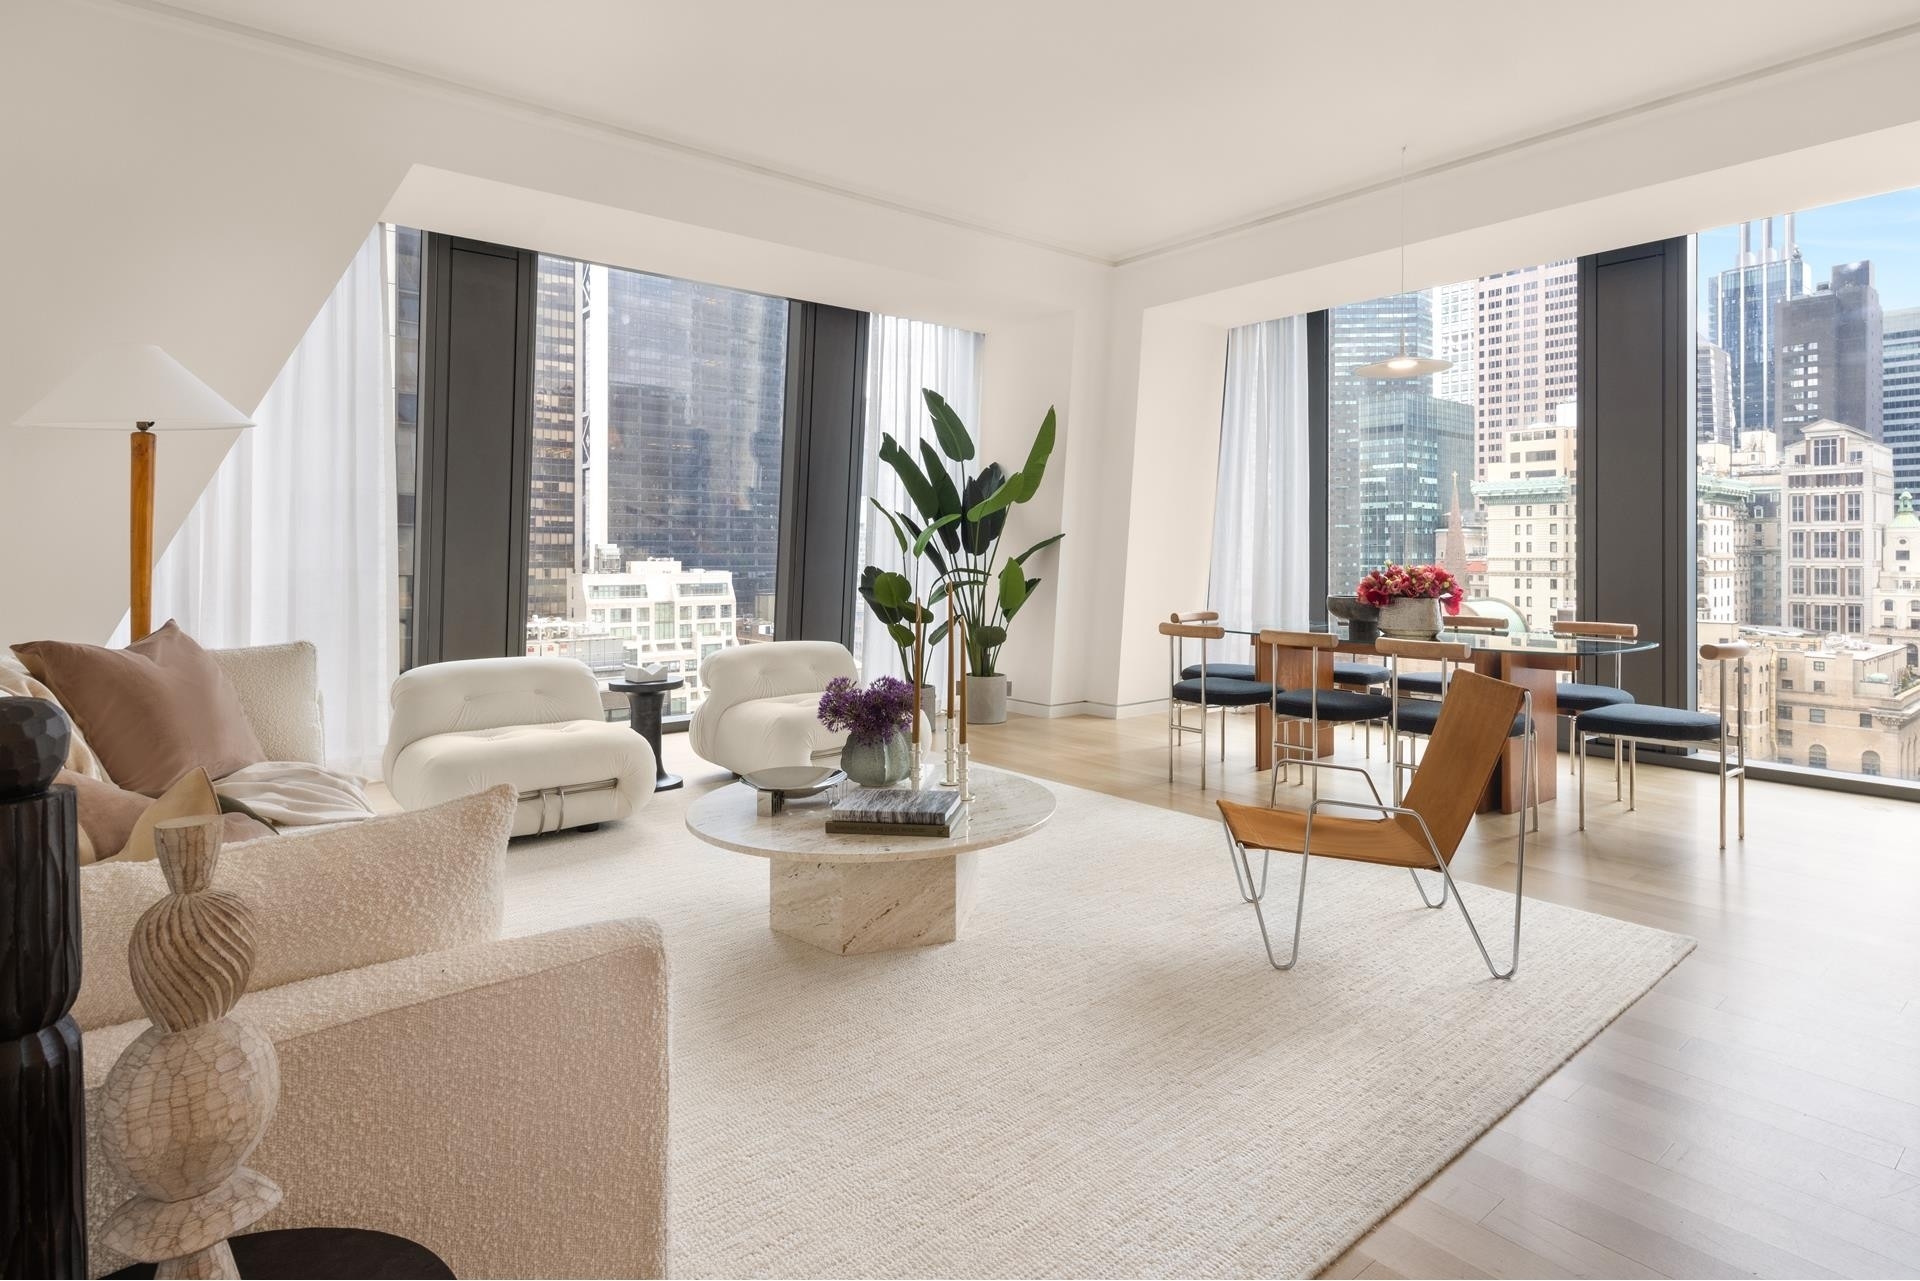 Condominium for Sale at 53W53, 53 53RD ST W, 21A Midtown West, New York, NY 10019